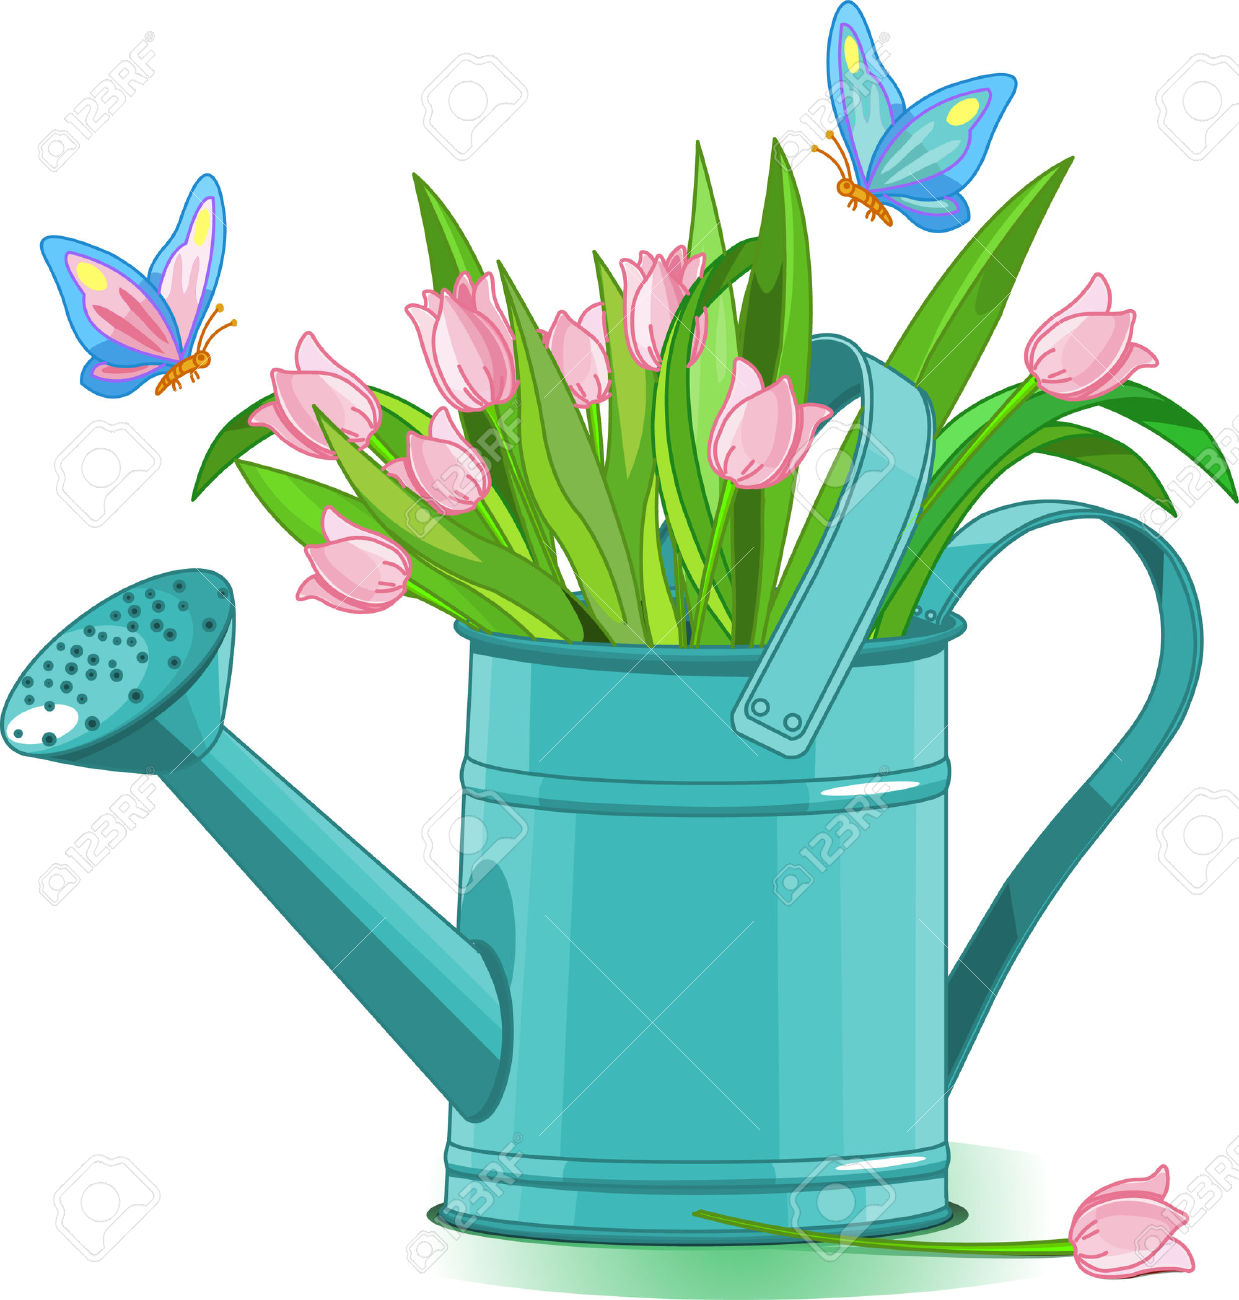 Smiling Watering Can Clip Art